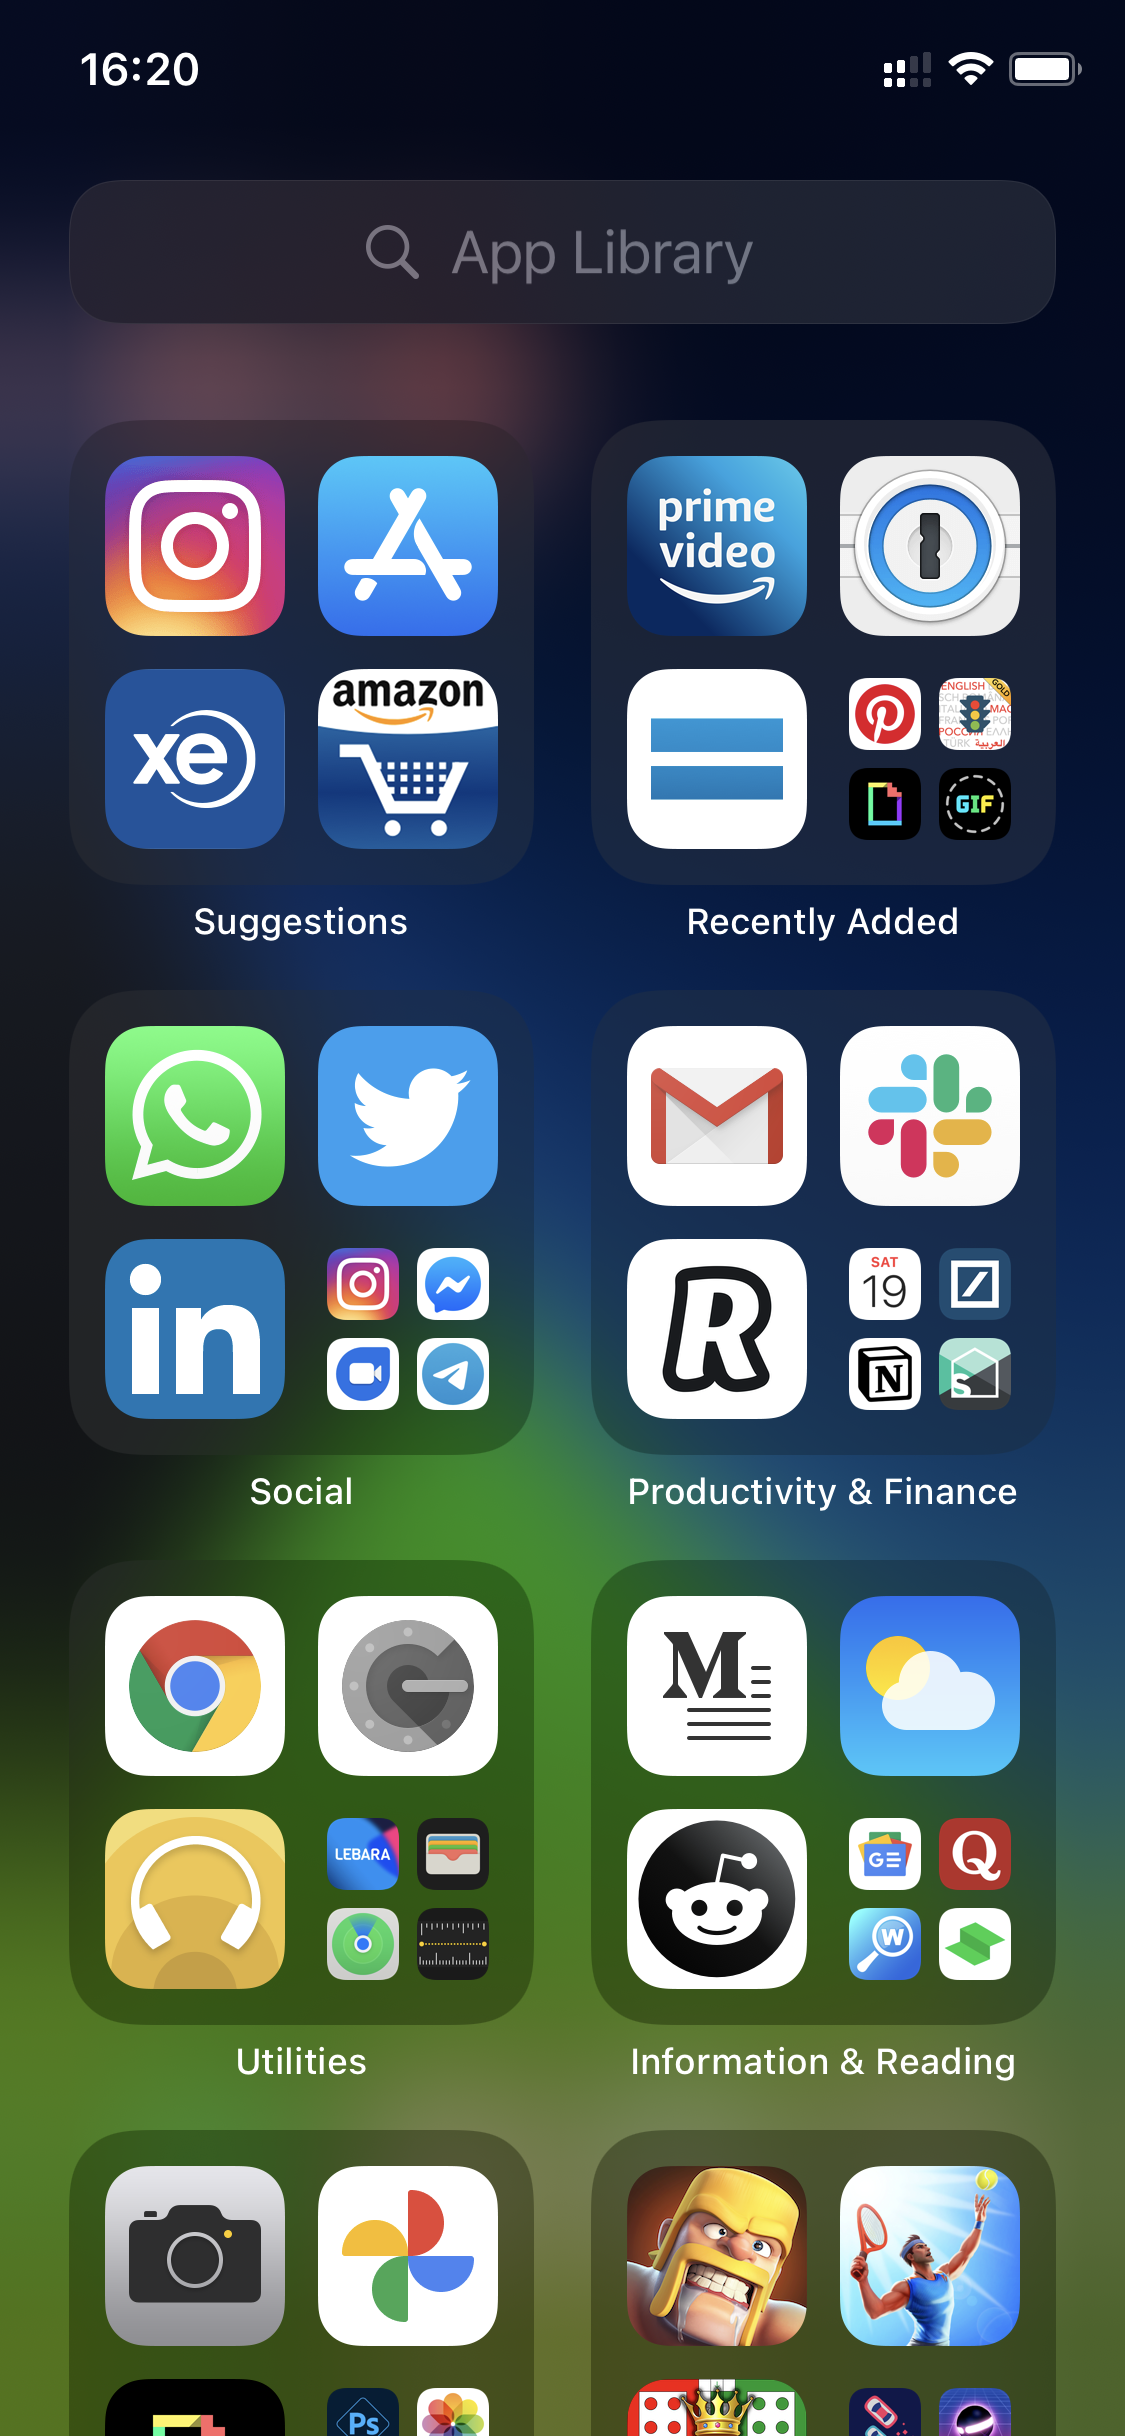 App Library. Provided by author